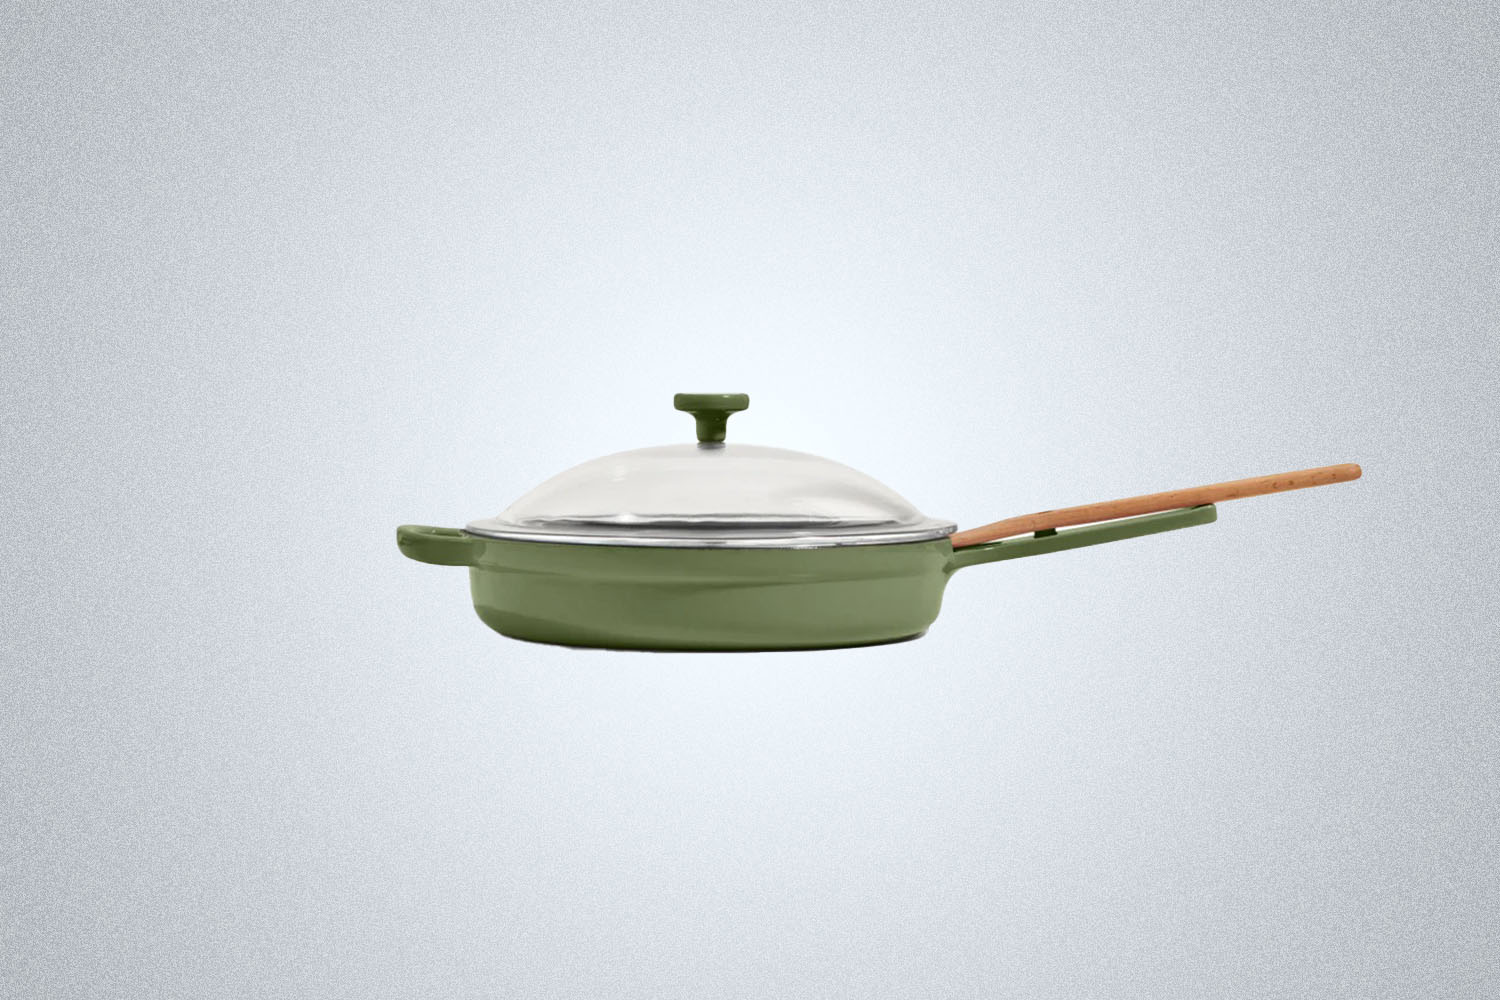 The Our Place Cast Iron Pan in green on a gray background